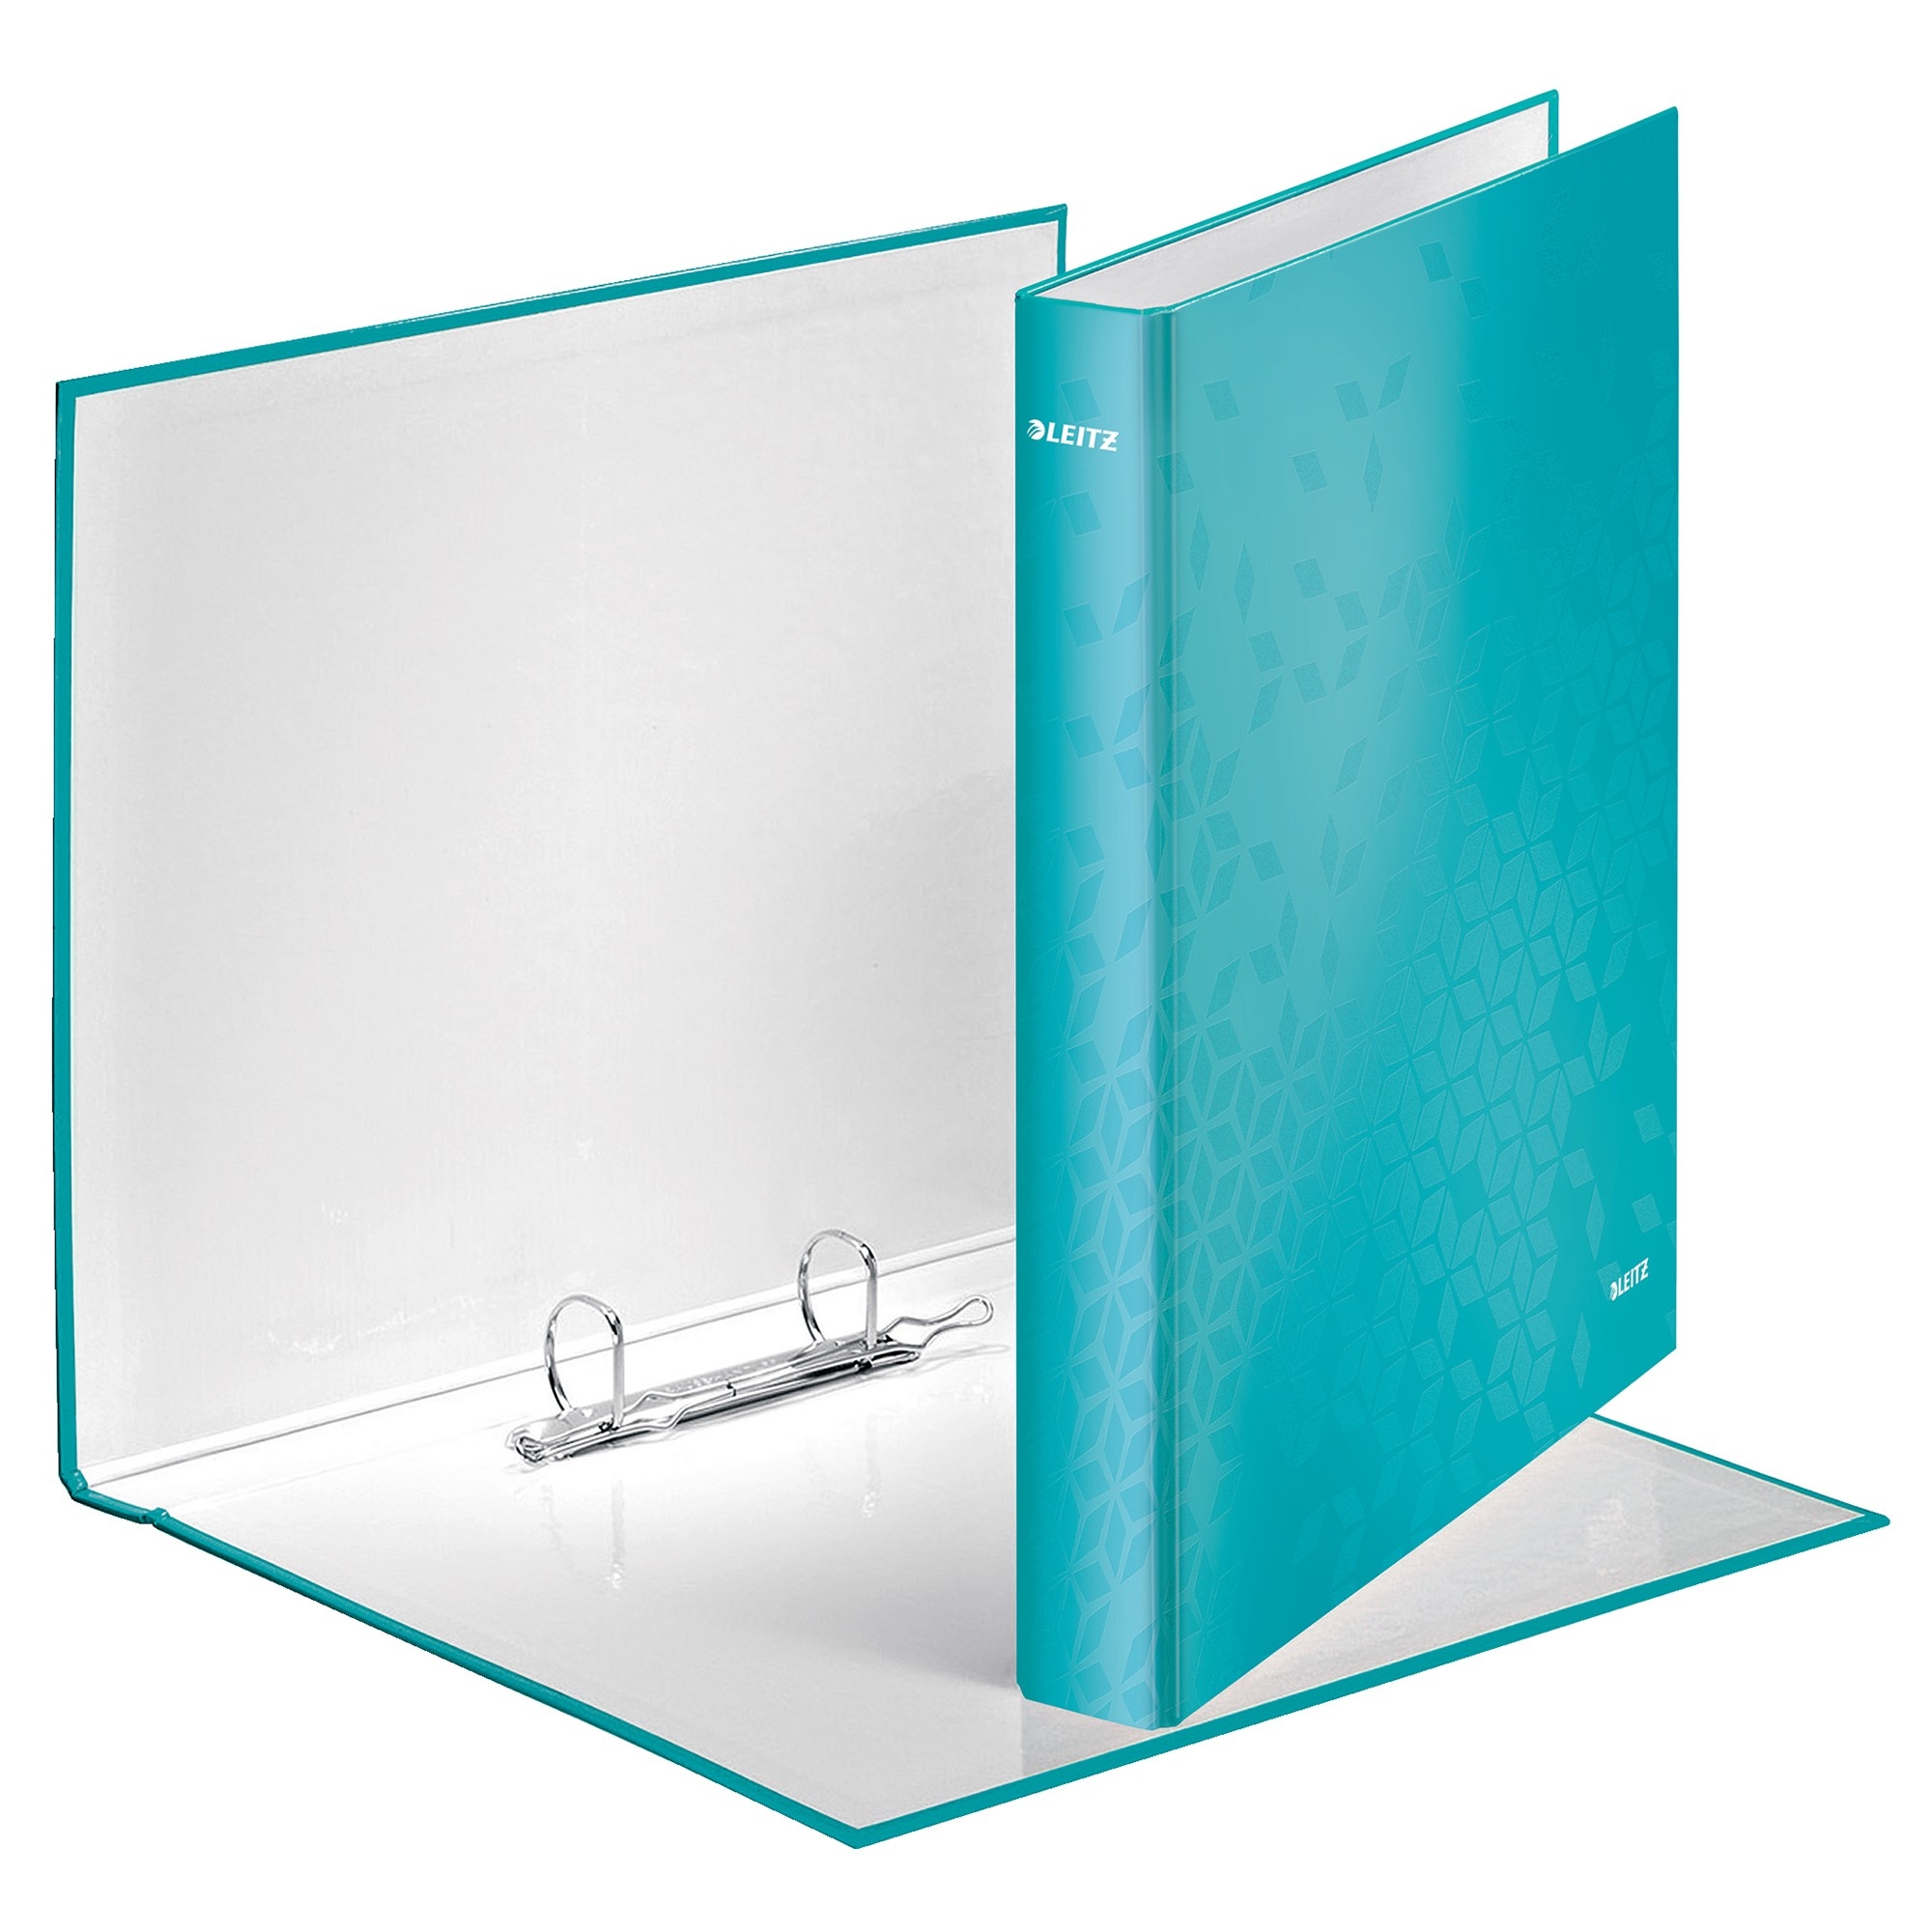 Leitz 4-ring binder - turquoise: Buy Online at Best Price in Egypt - Souq  is now Amazon.eg